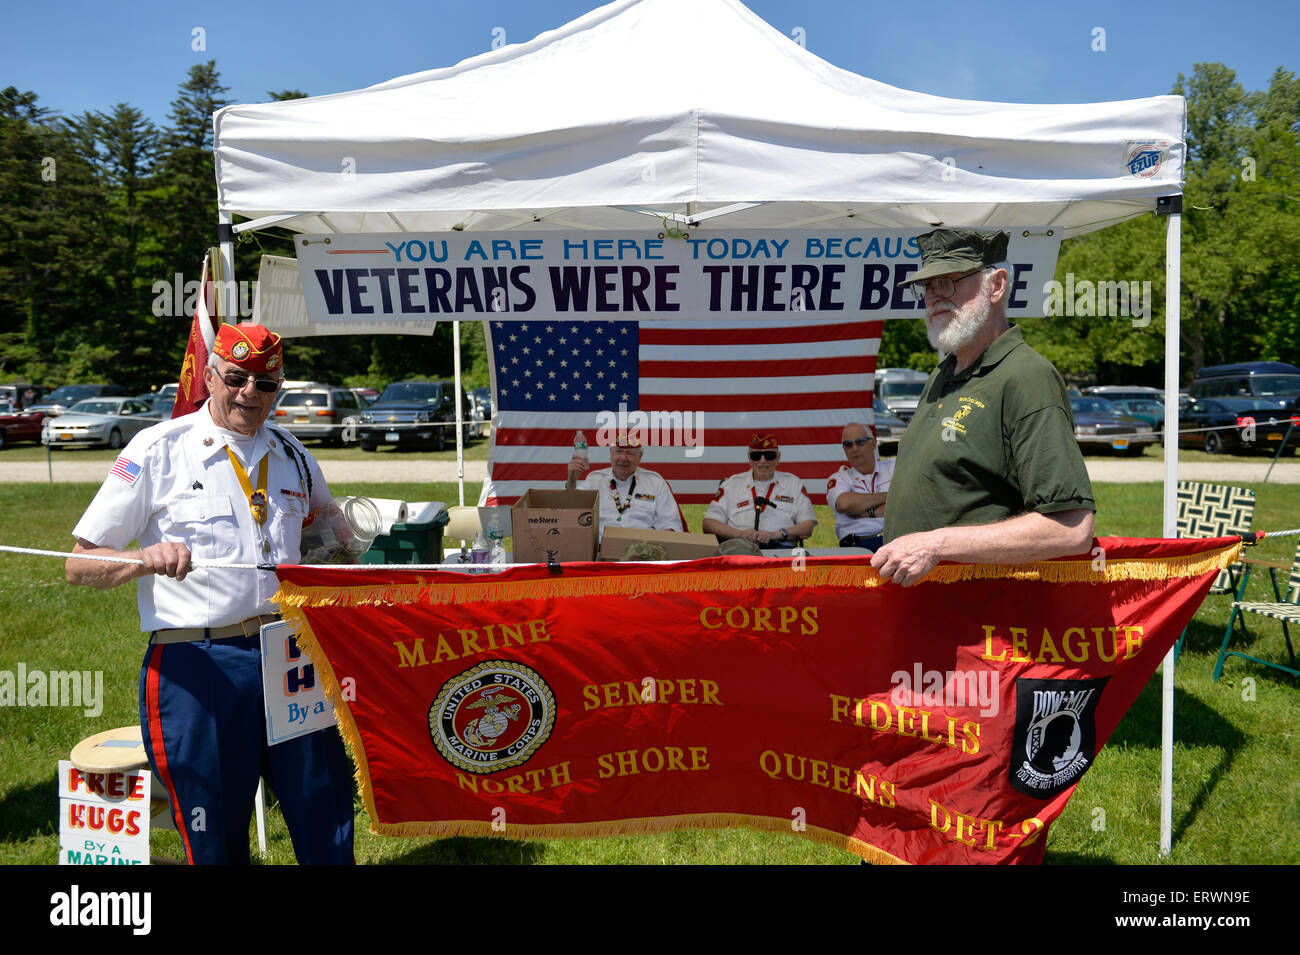 Old Westbury, New York, United States. 7th June 2015. JOHN GIORDANO of Whitestone, at left, and a fellow Marine veteran, hold a red Marine Corps League banner, in front of FREE HUGS By a MARINE fundraising booth of the Marine Corps League North Shore Queens Detachment #240 at the 50th Annual Spring Meet Car Show sponsored by Greater New York Region Antique Automobile Club of America. Over 1,000 antique, classic, and custom cars participated at the popular Long Island vintage car show held at historic Old Westbury Gardens. Stock Photo